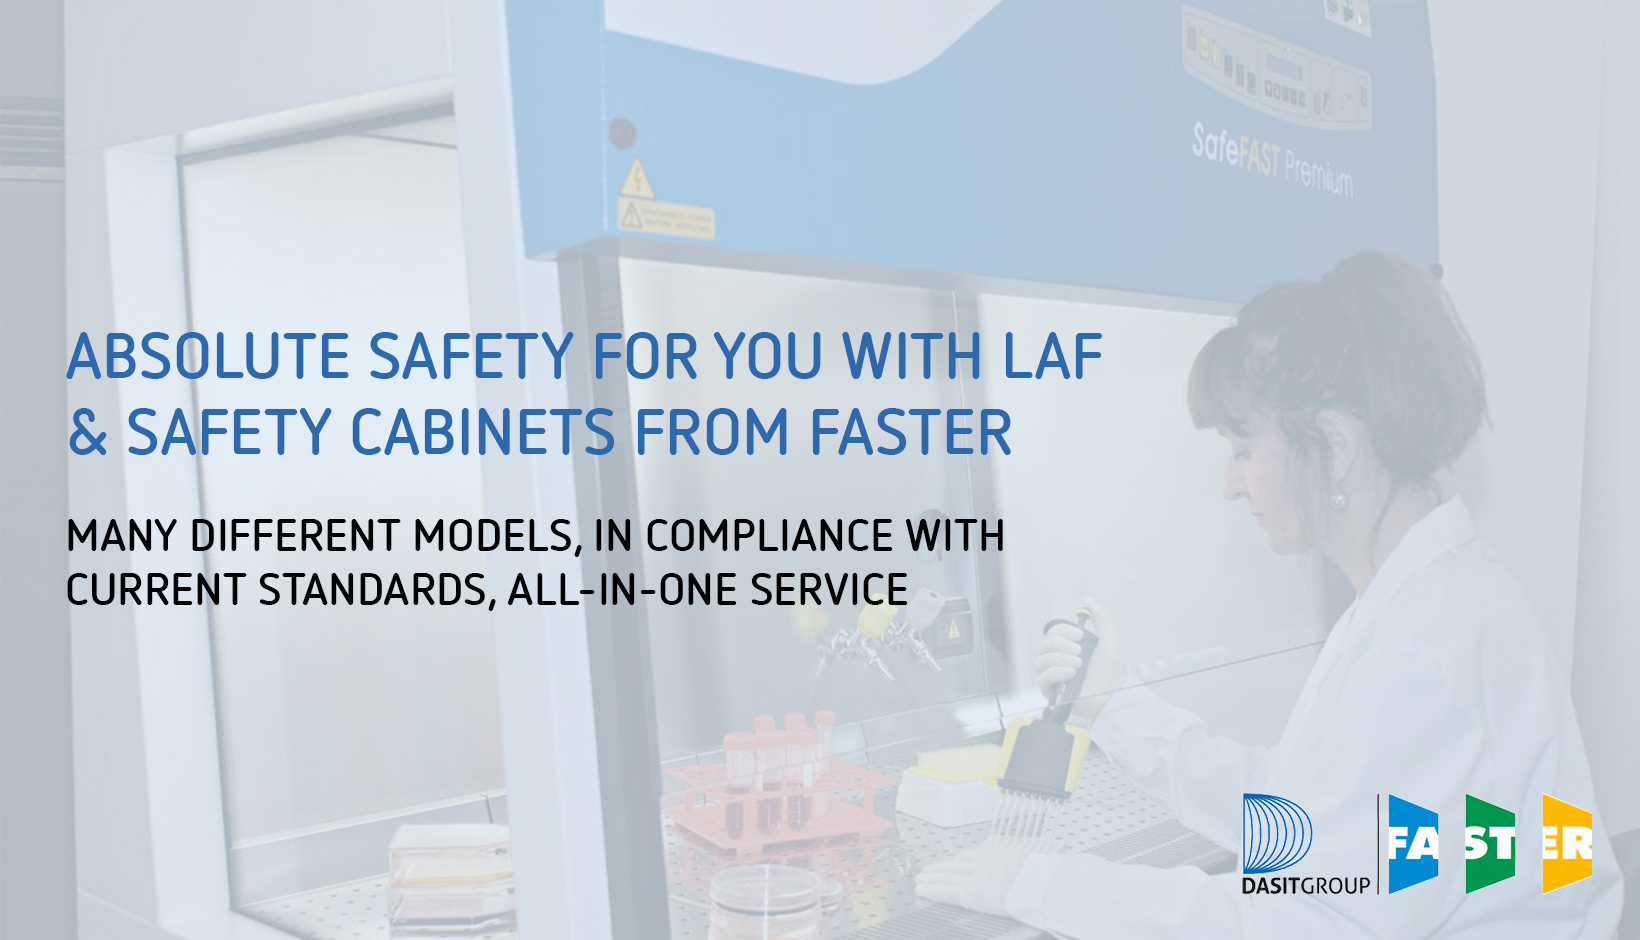 Faster Laminar Airflow Cabinets - absolute safety